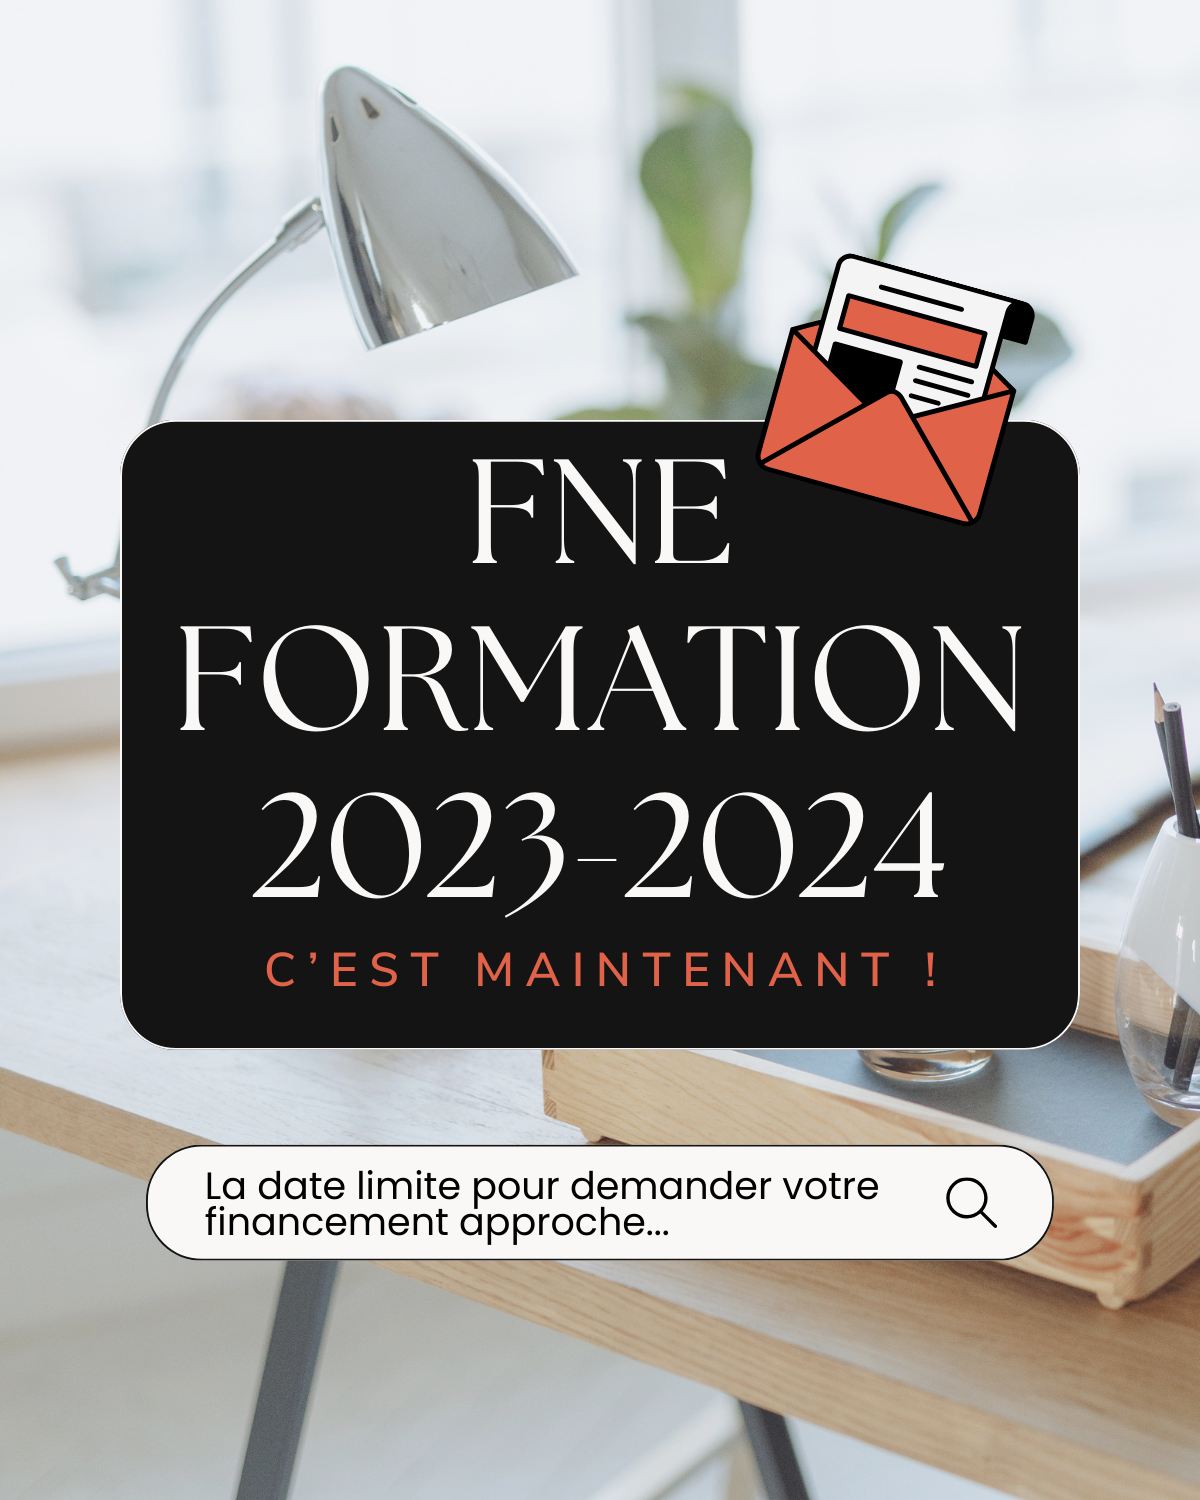 FNE Formation 2023-2024